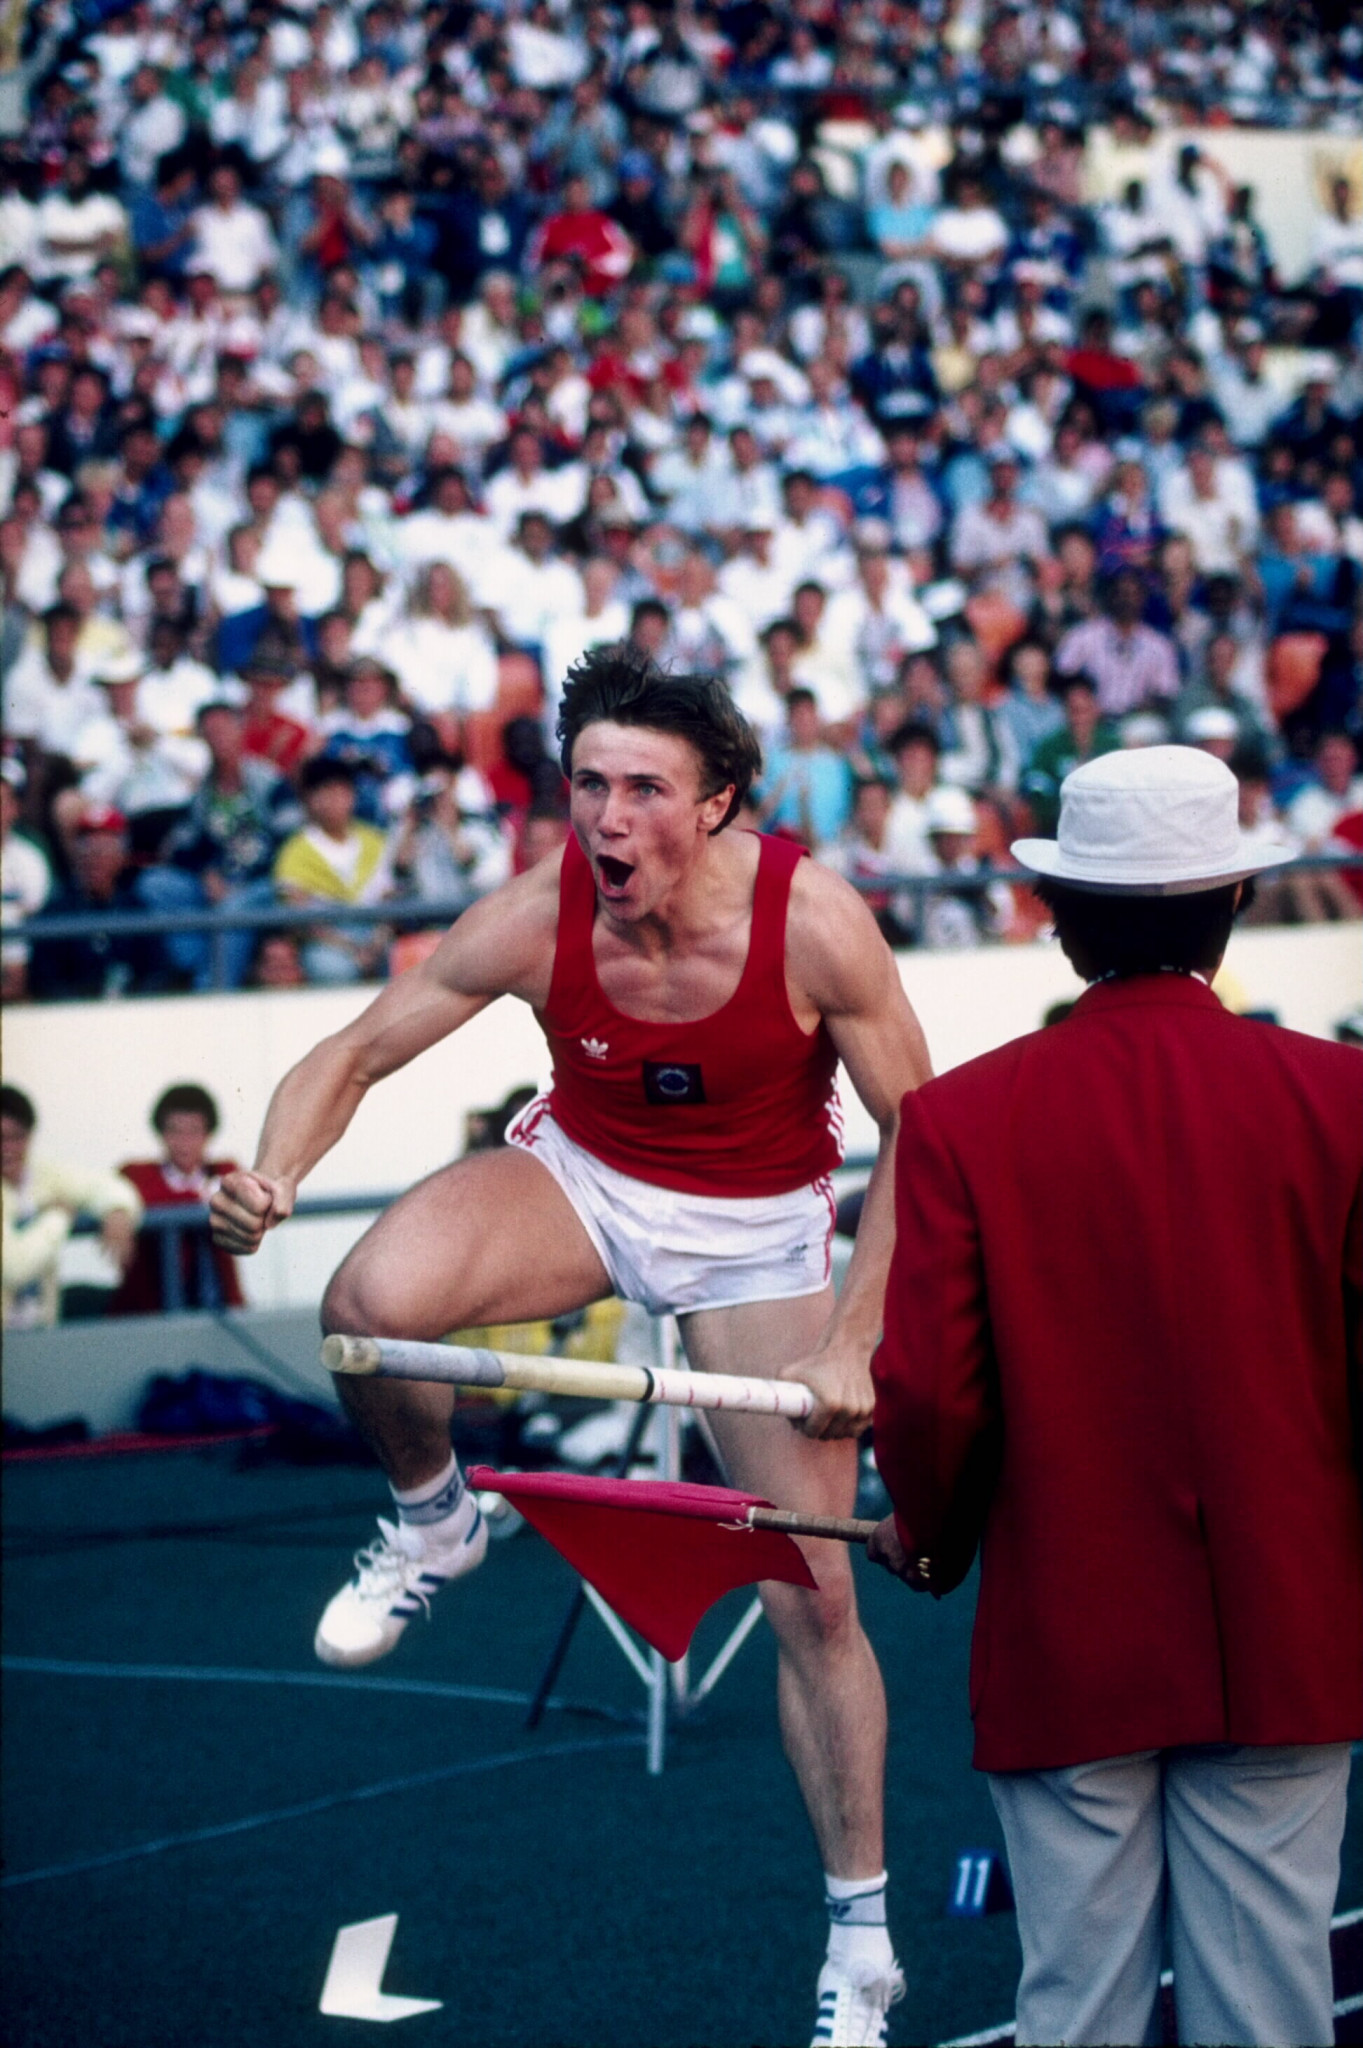 Sergey Bubka, pictured during the 1988 Seoul Olympics final where he took pole vault gold, set a world indoor record of 6.14m at Liévin in 1993 ©Getty Images